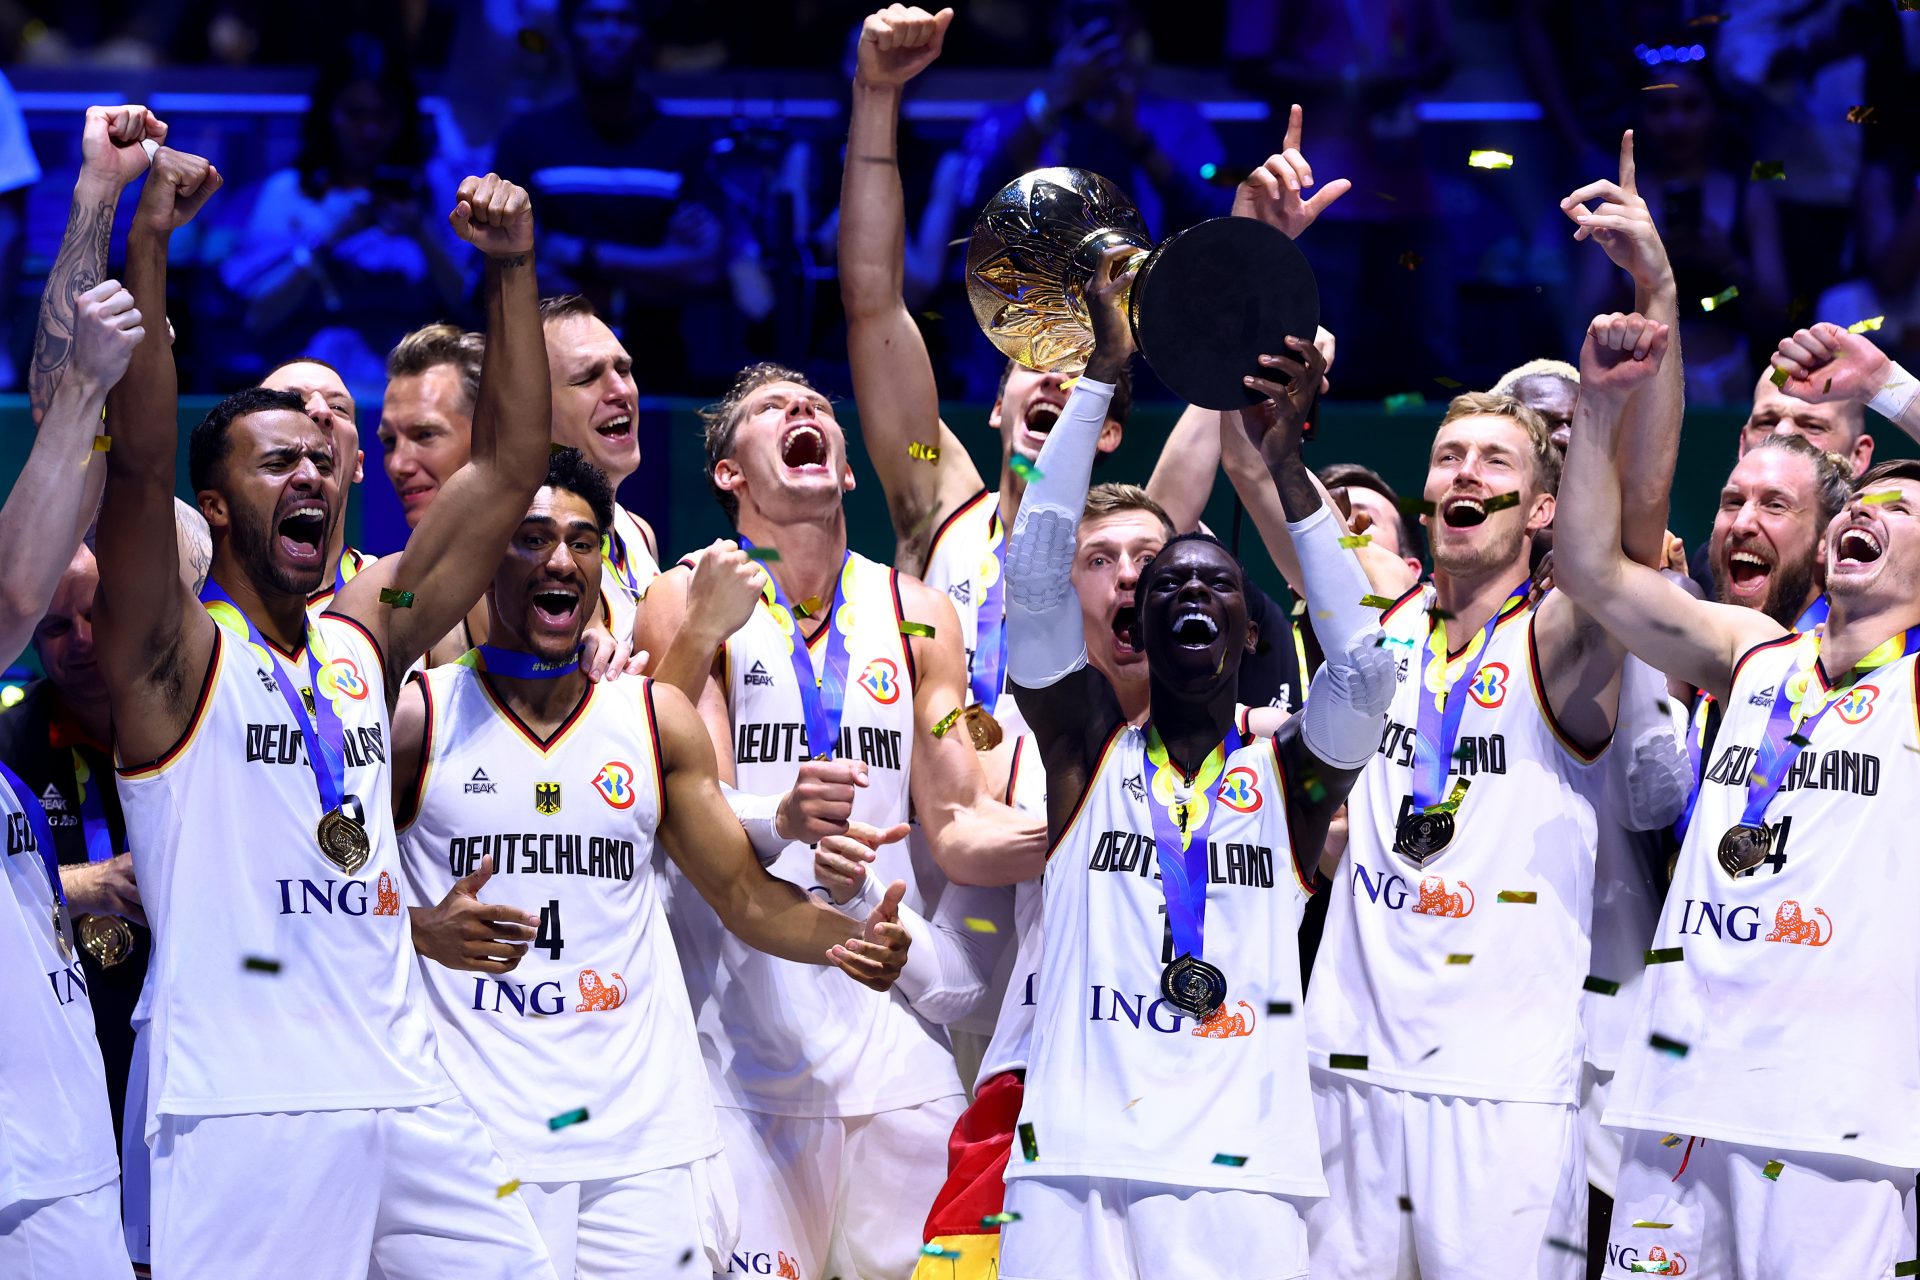 Jubilation for Germany after historic FIBA World Cup Win